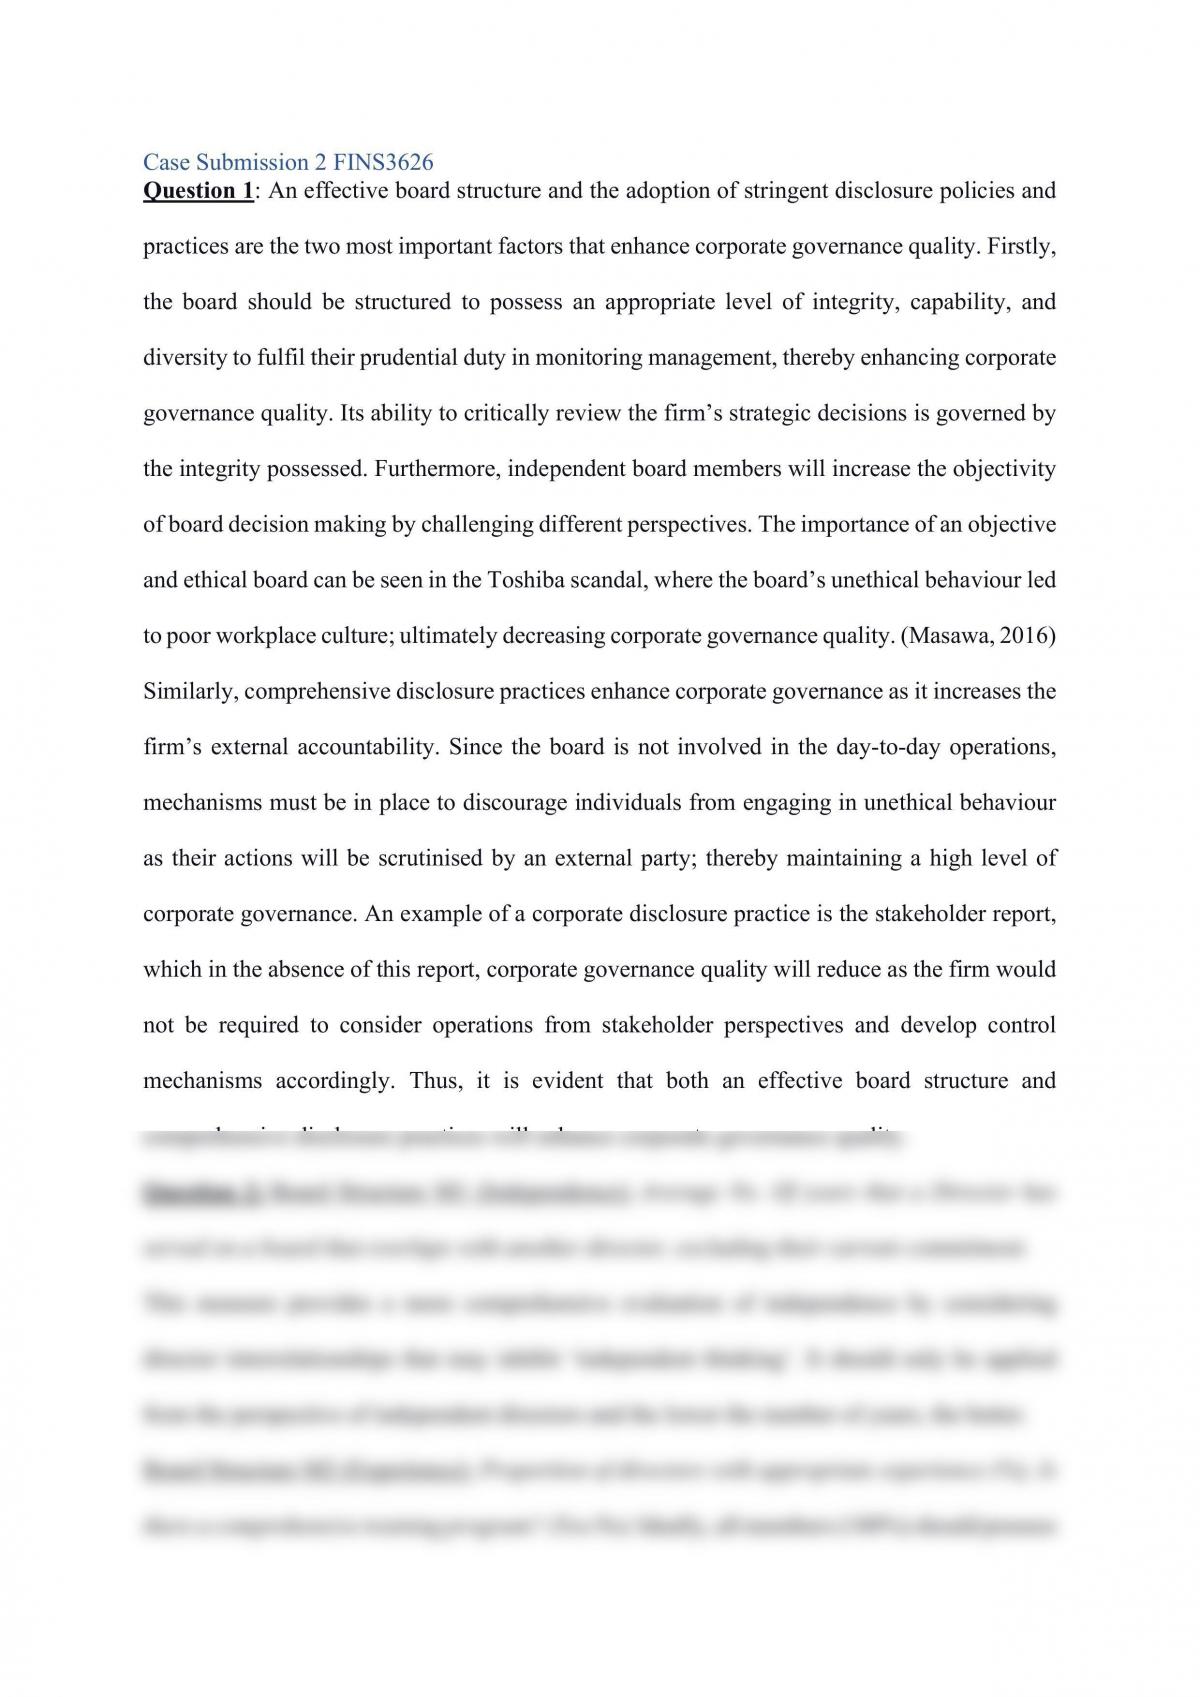 Case Submission 2 FINS3626 - Page 1